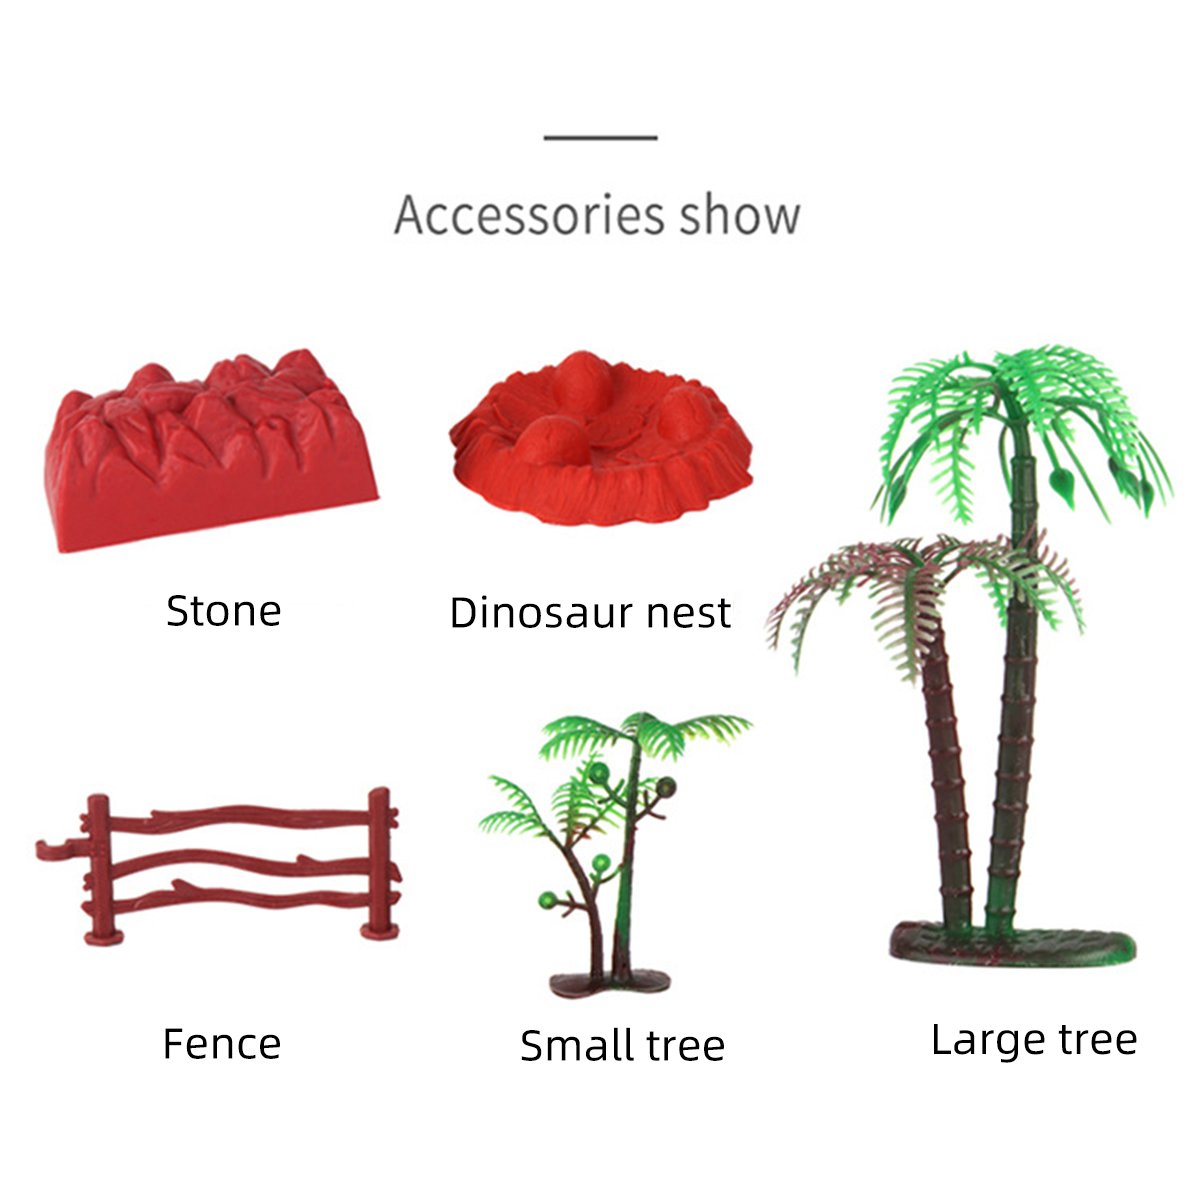 2833346365Pcs-Multi-style-Diecast-Dinosaurs-Model-Play-Set-Educational-Toy-with-Play-Mat-for-Kids-Ch-1836203-10